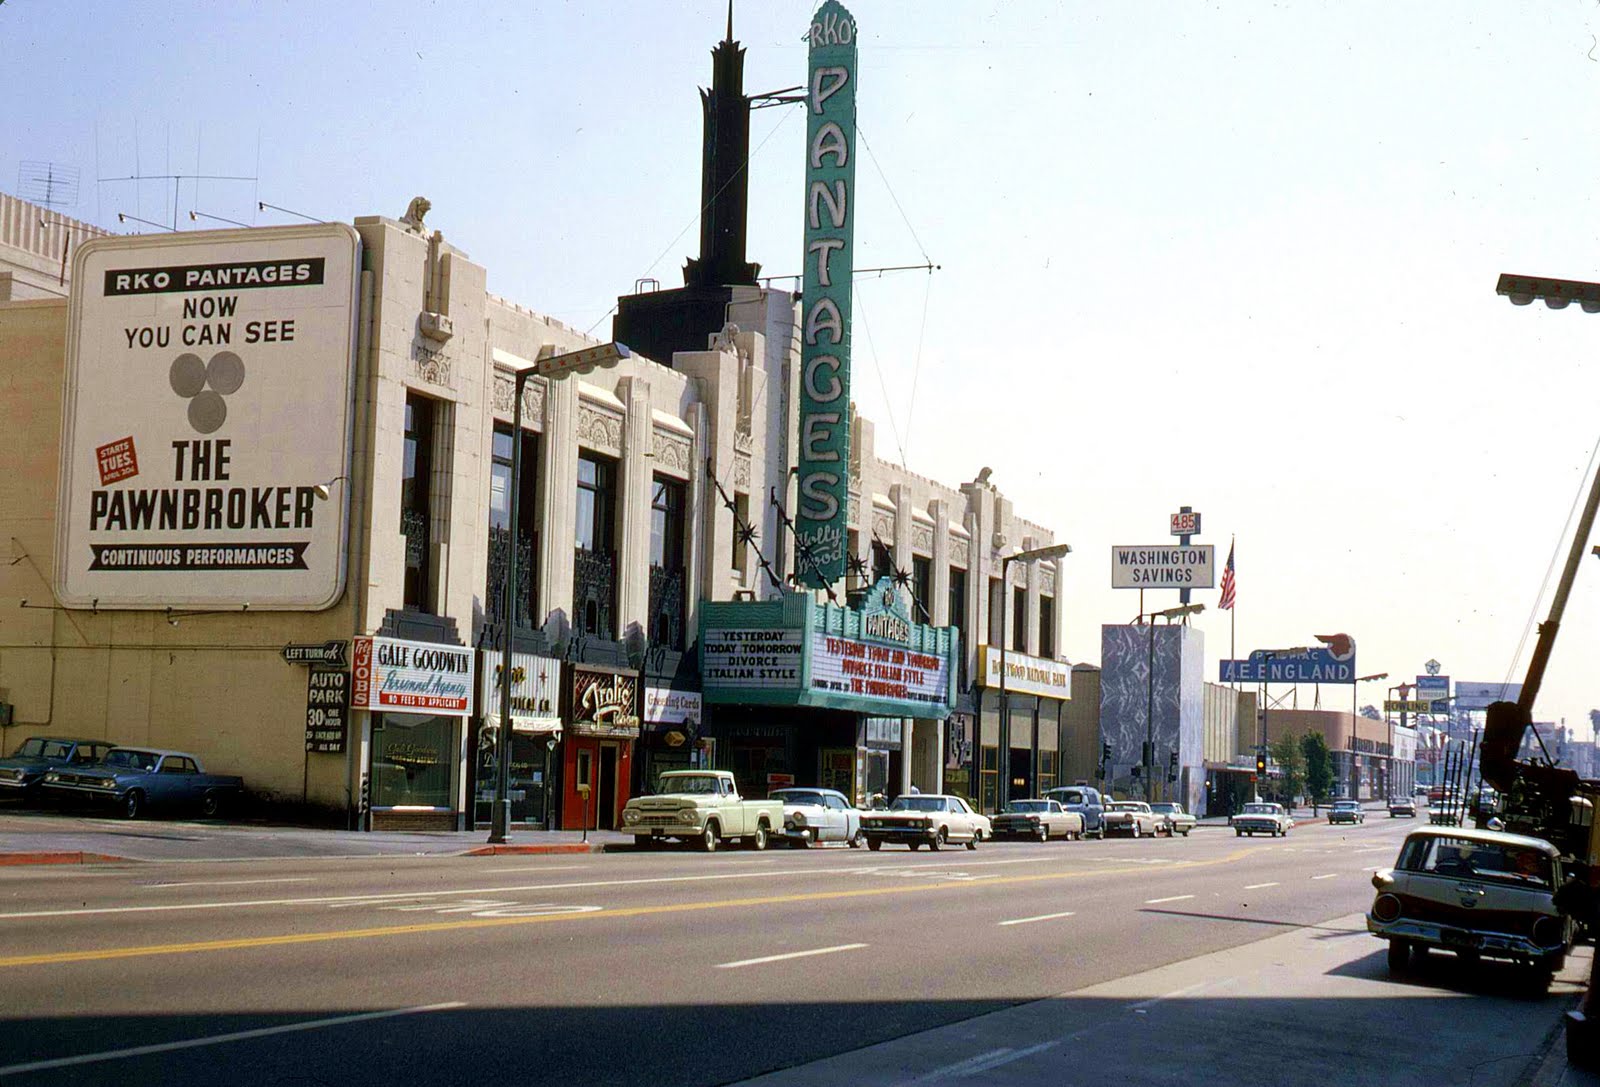 [Immagine: Pantages+Theater+Hollywood+Blvd+1965+Hol...fornia.jpg]